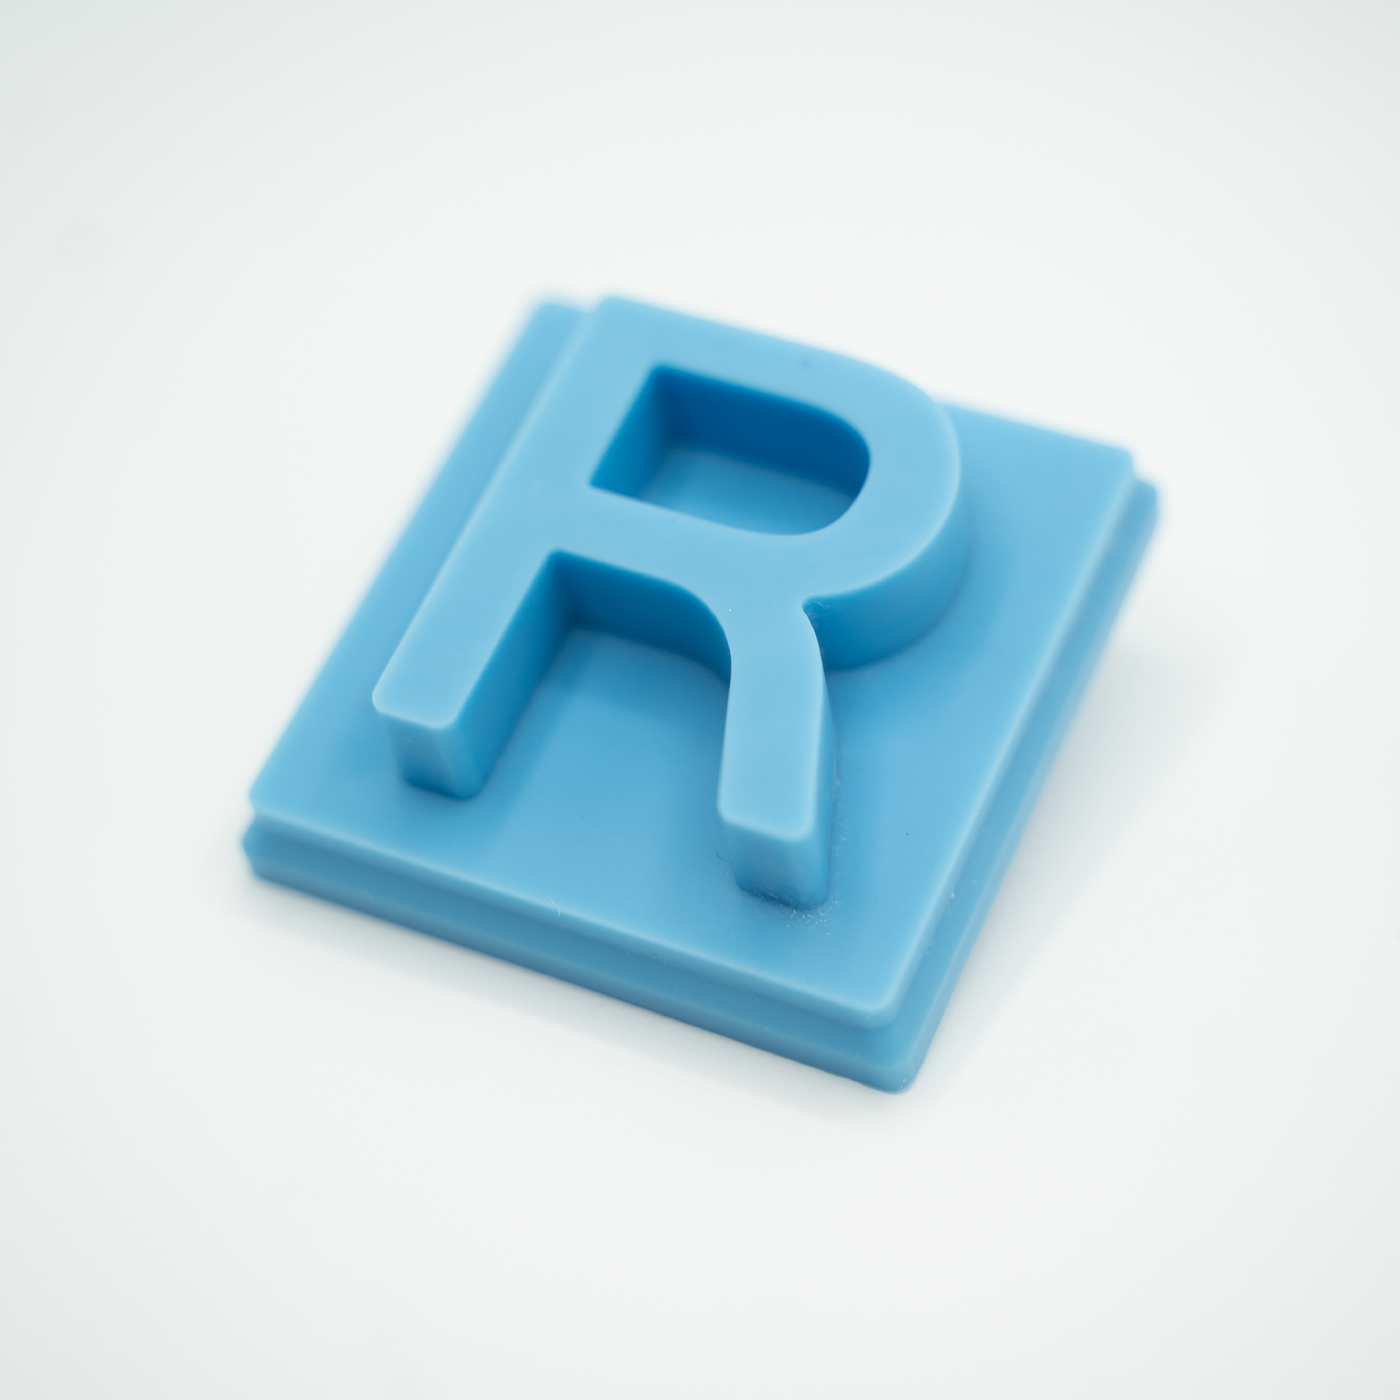 Letter R Inserts - 3 Pack